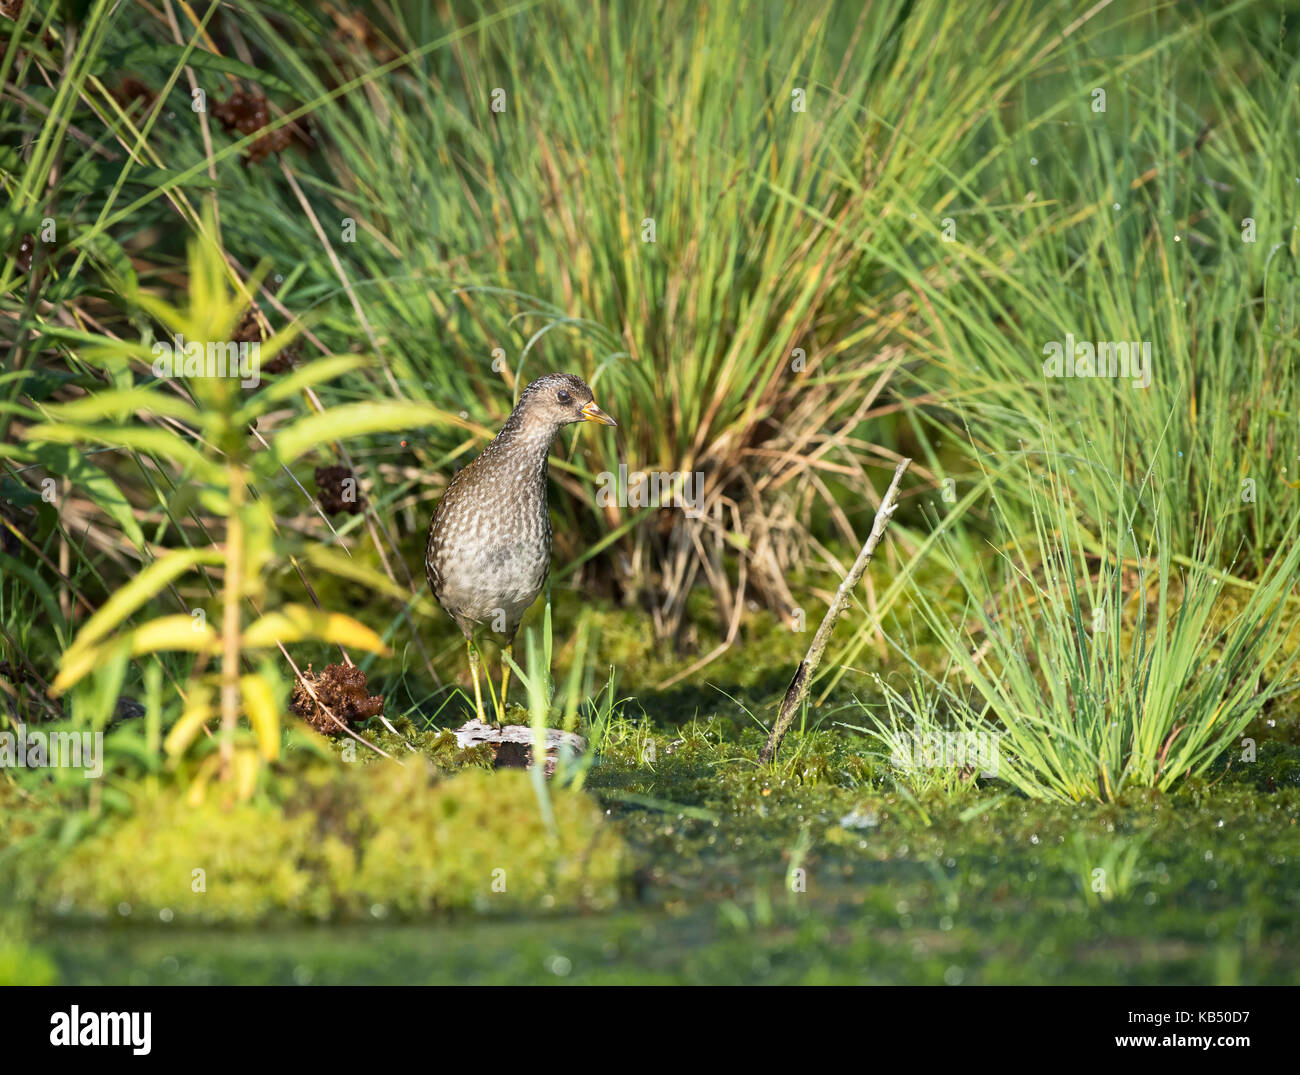 Spotted Crake (Porzana porzana) standing in a fen with grass and peat moss (sphagnum sp), The Netherlands, Drenthe, Bargerveen National Park Stock Photo